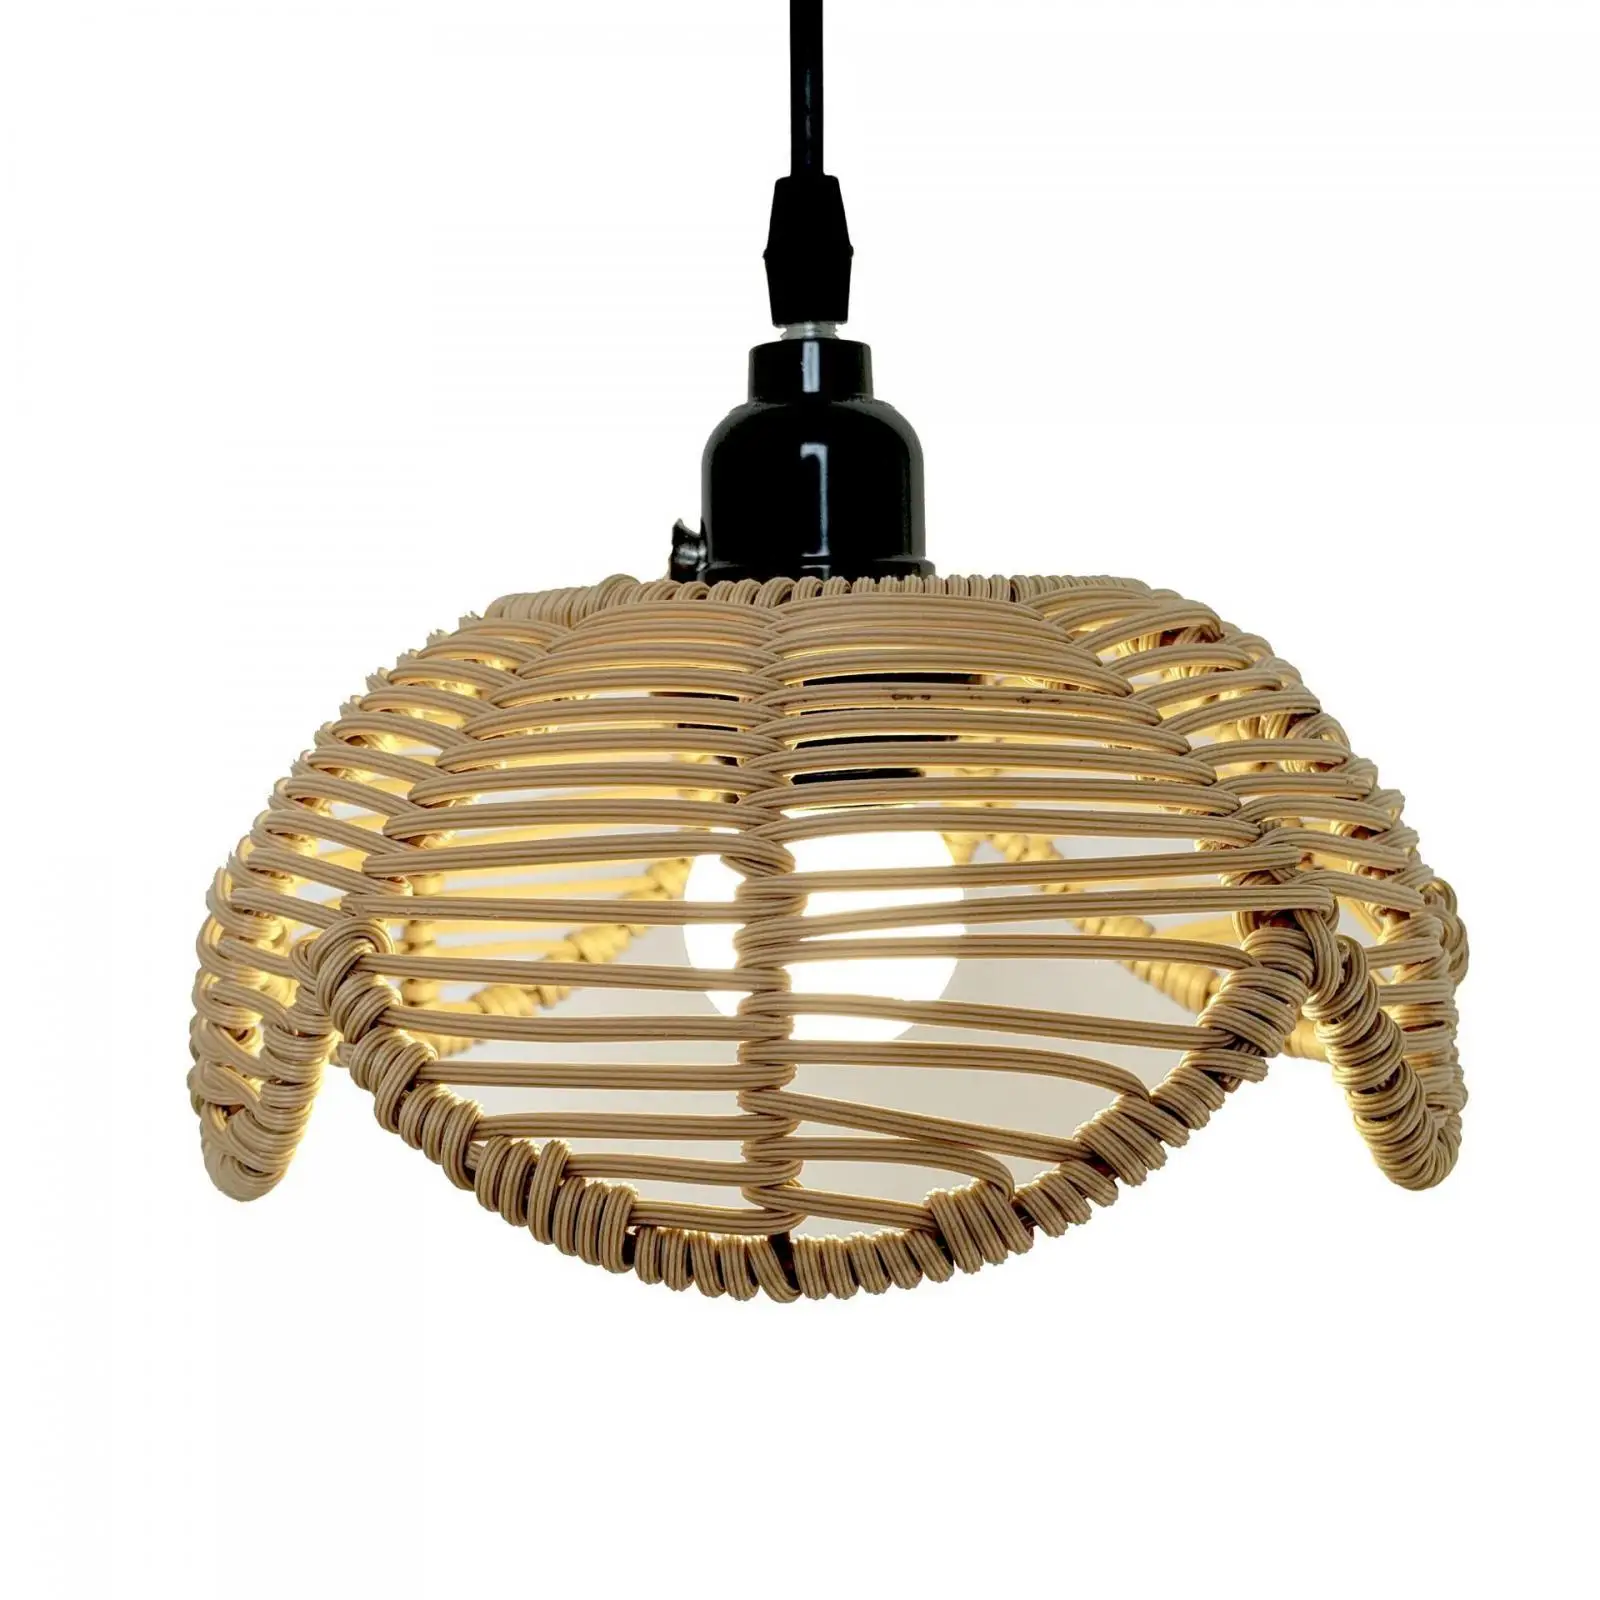 Handwoven Rattan Lampshade Decor Light Fixture Shade Creative Ceiling Pendant Light Cover for Cafe Kitchen Restaurant Hotel